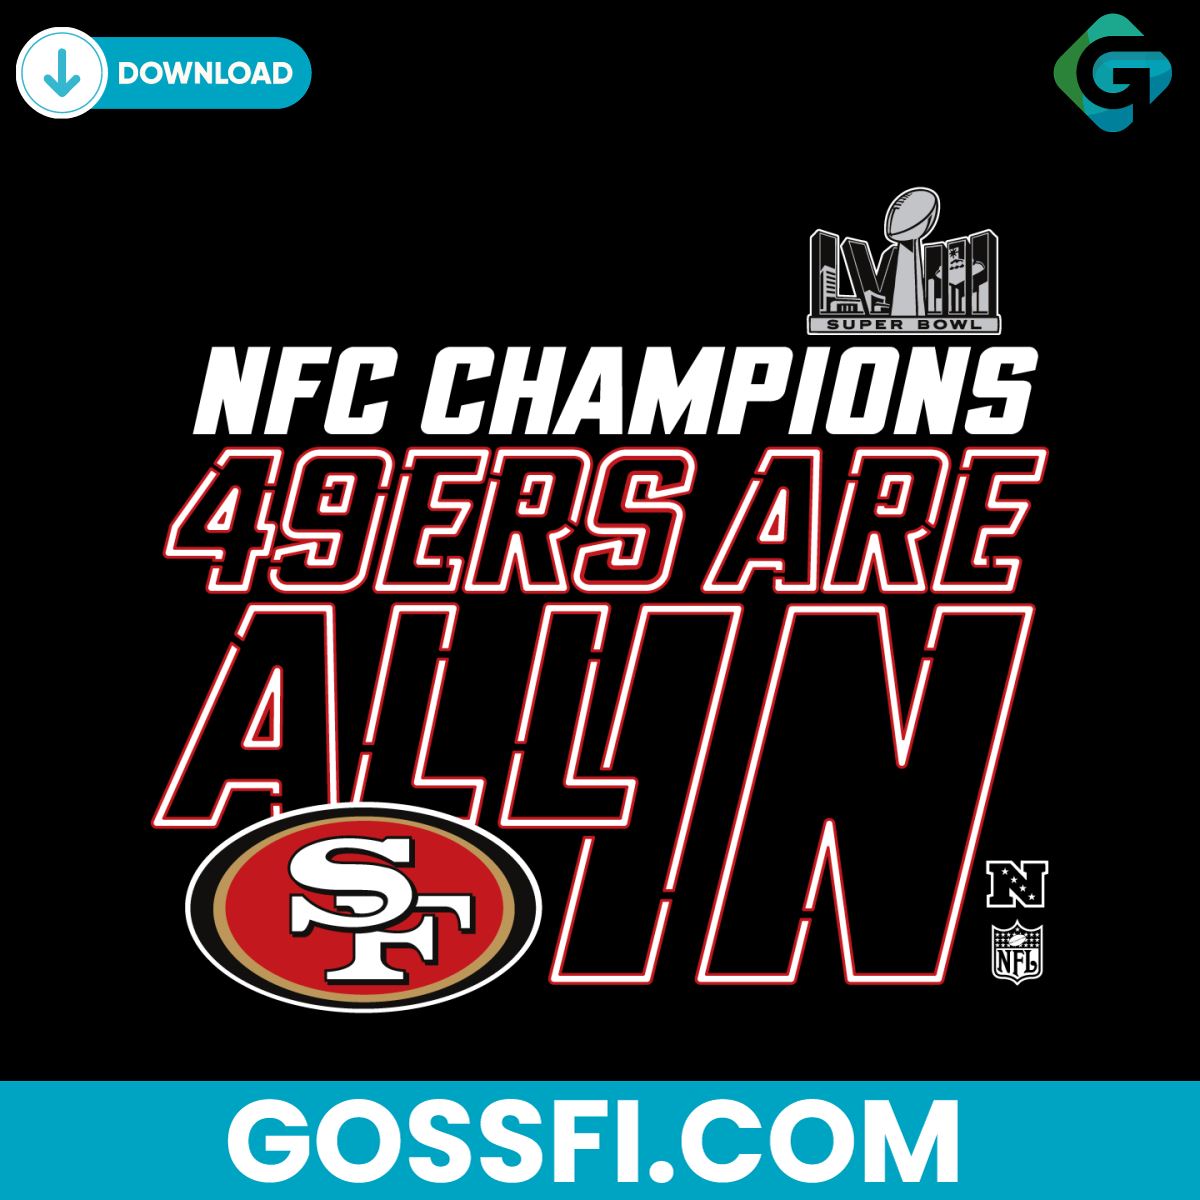 nfc-champions-49ers-are-all-in-san-francisco-svg